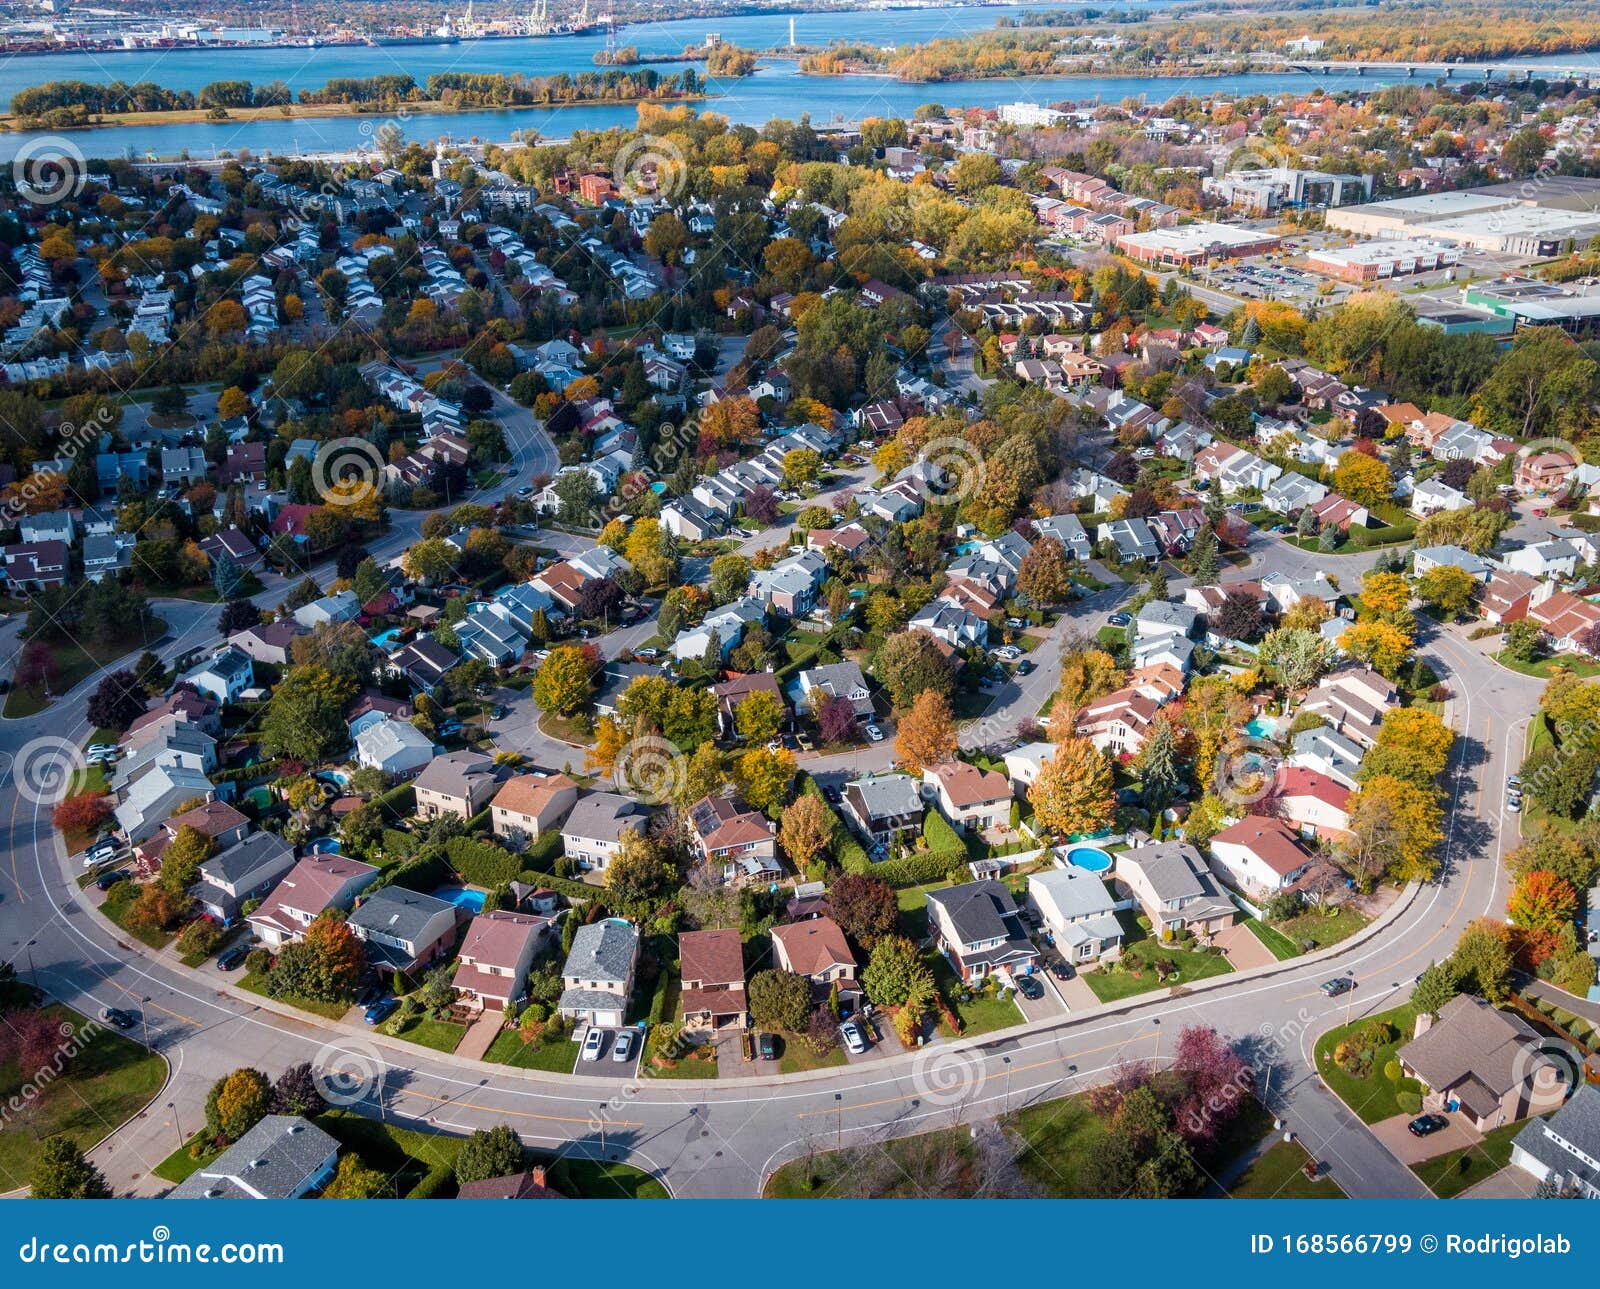 montreal, quebec, canada, aerial view of houses in residential neighbourhood in autumn season